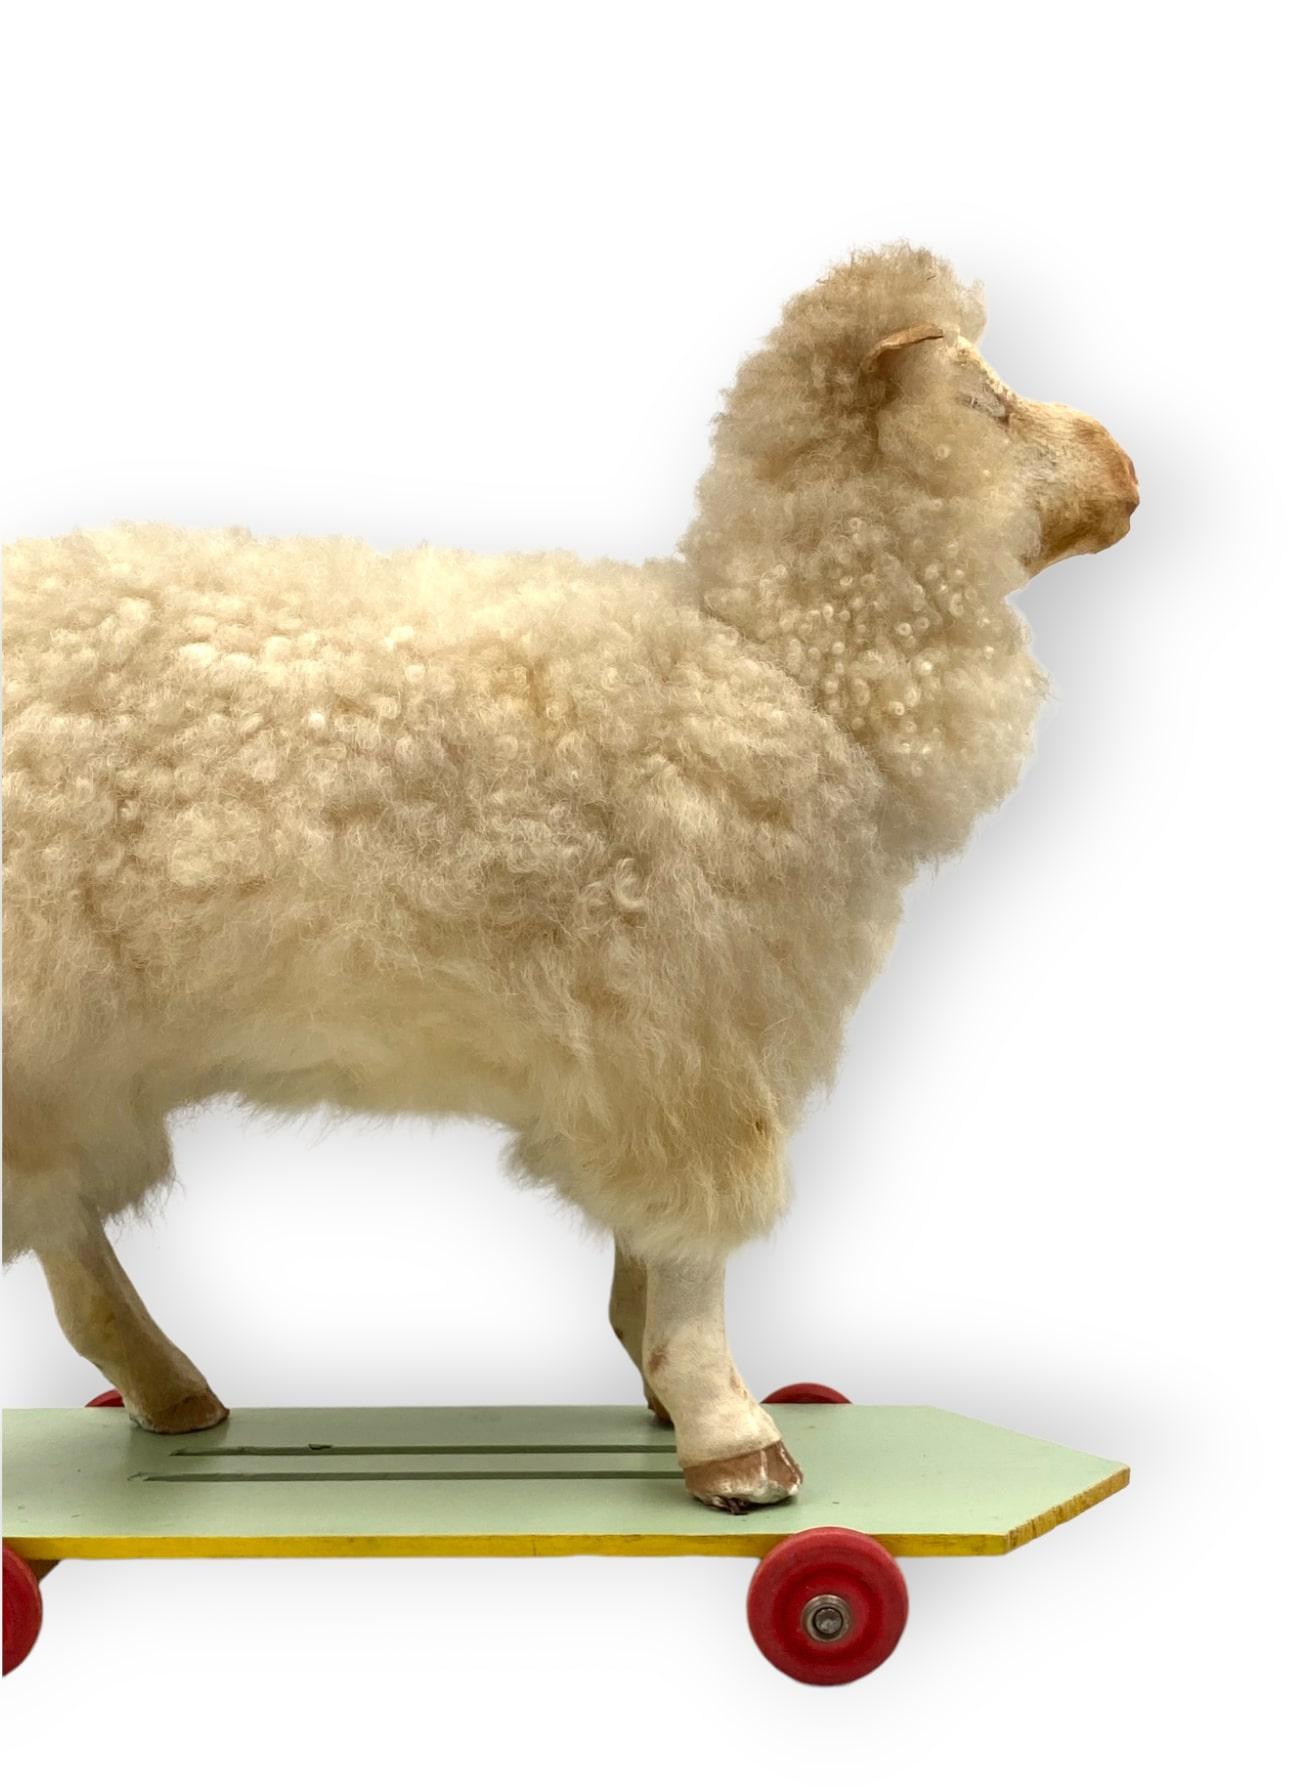 Folk Art Sheep Rolling Toy, first half of 20th Century For Sale 6